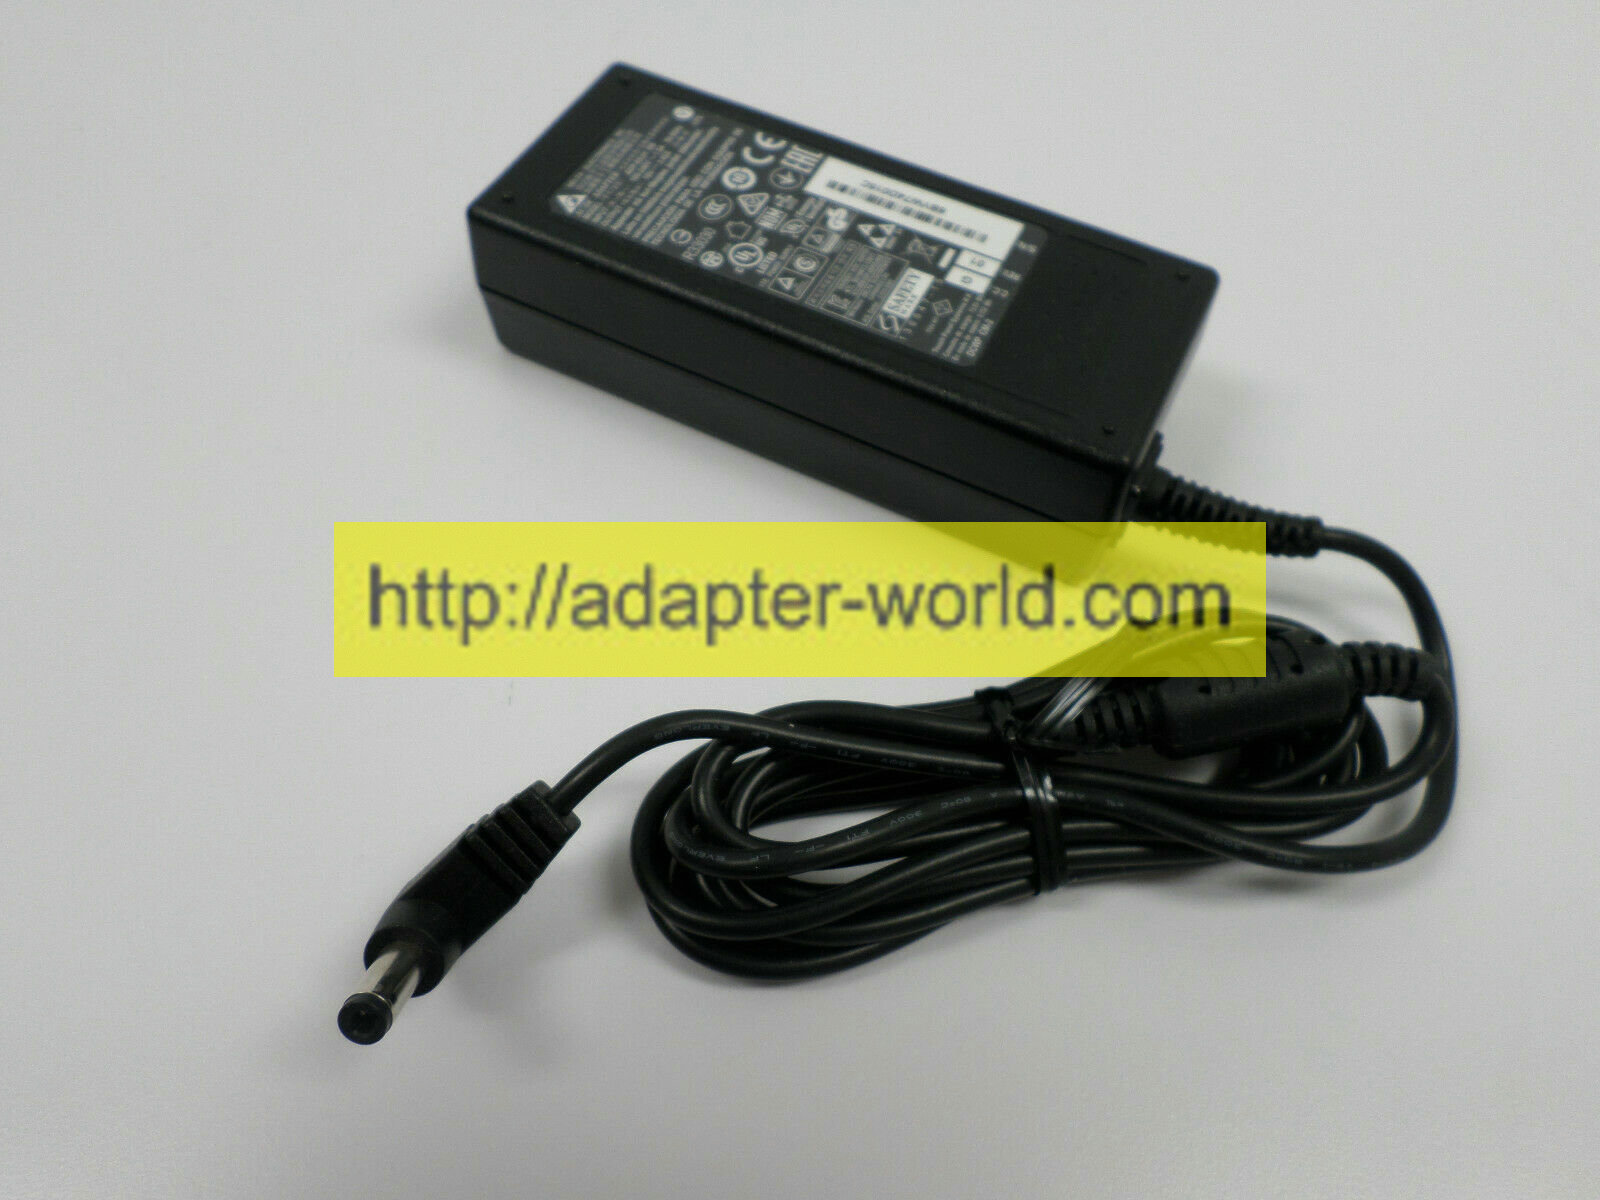 *100% Brand NEW* DELTA 19V 3.42A ADP-65JH HB ELECTRONICS AC/DC POWER ADAPTER